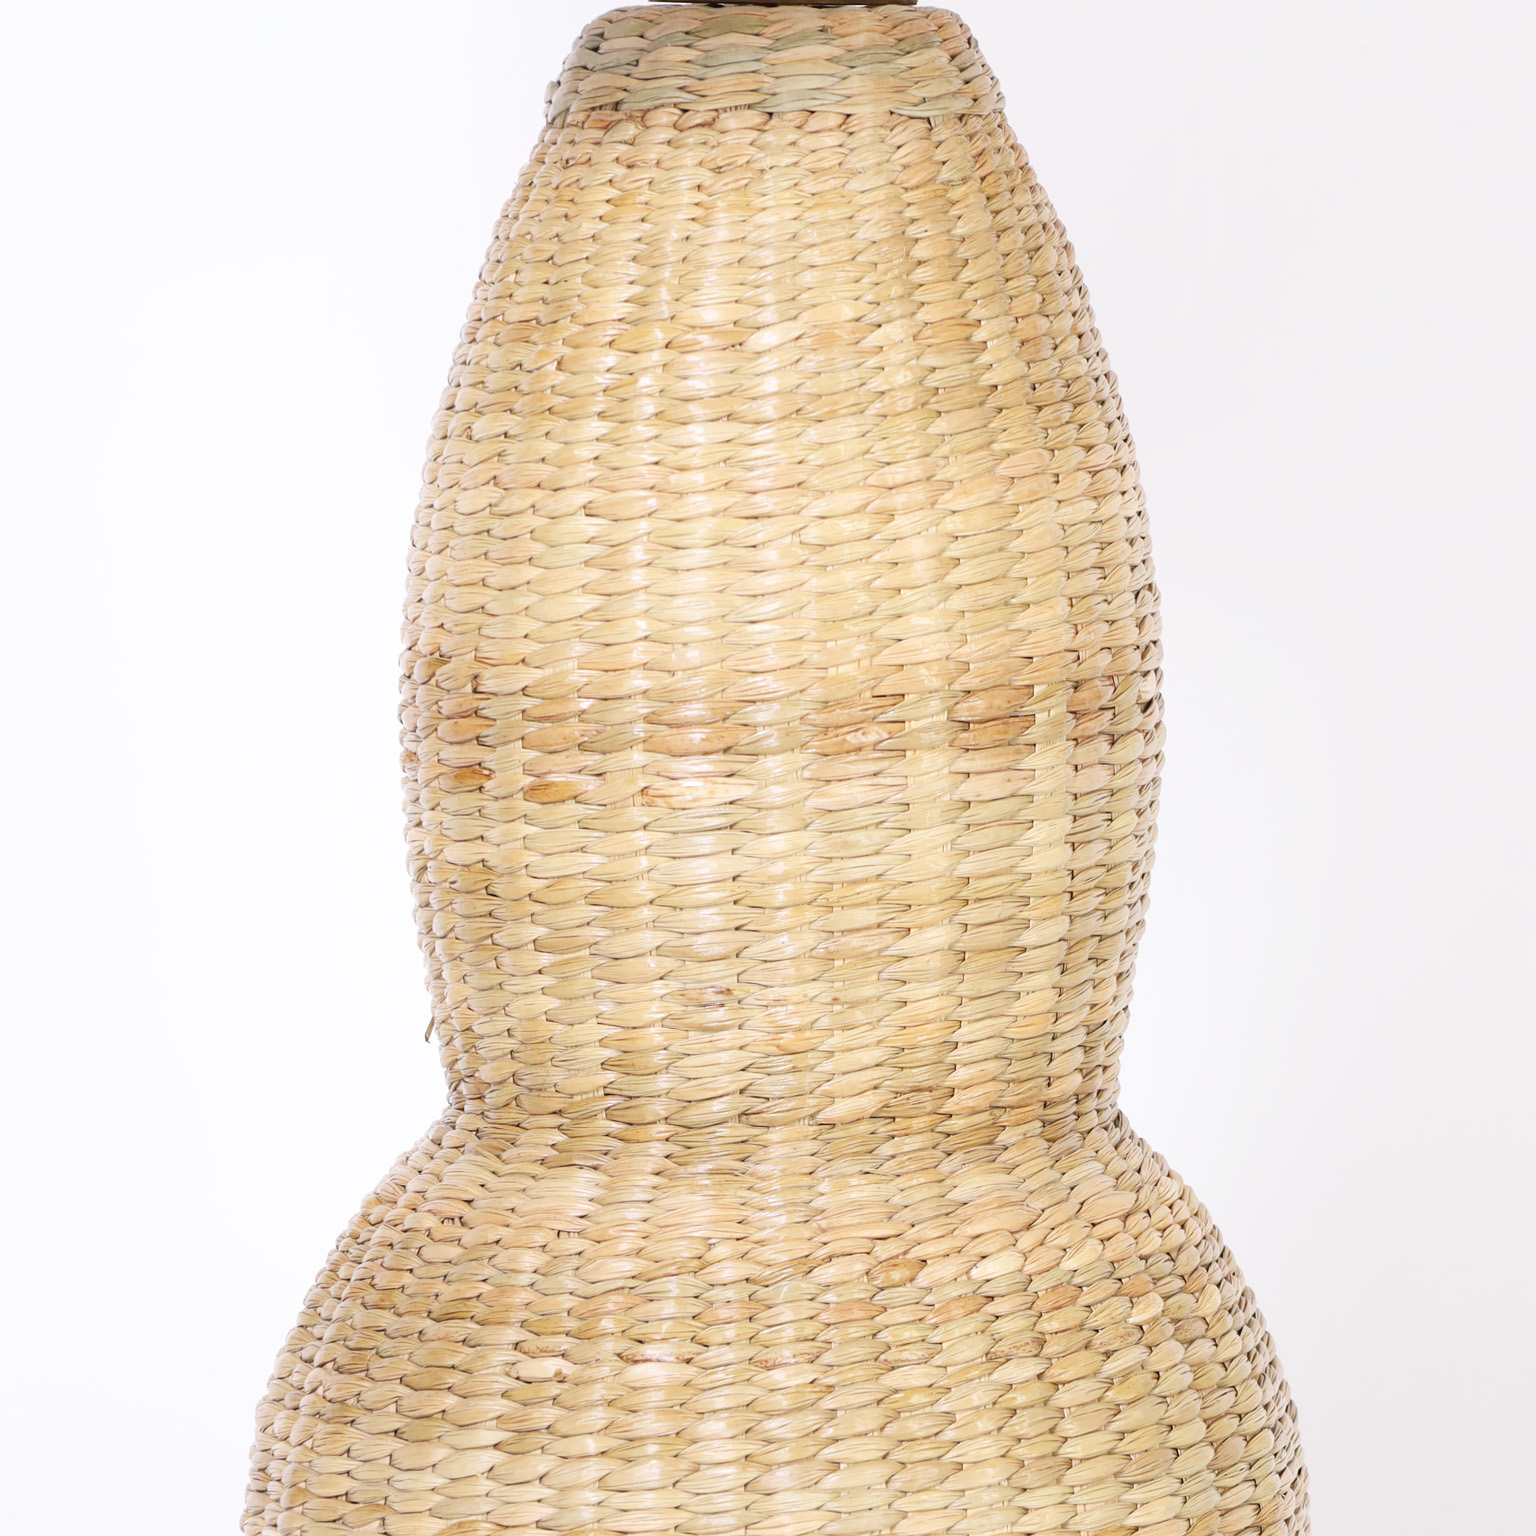 Pair of Woven Reed Table Lamps from the FS Flores Collection